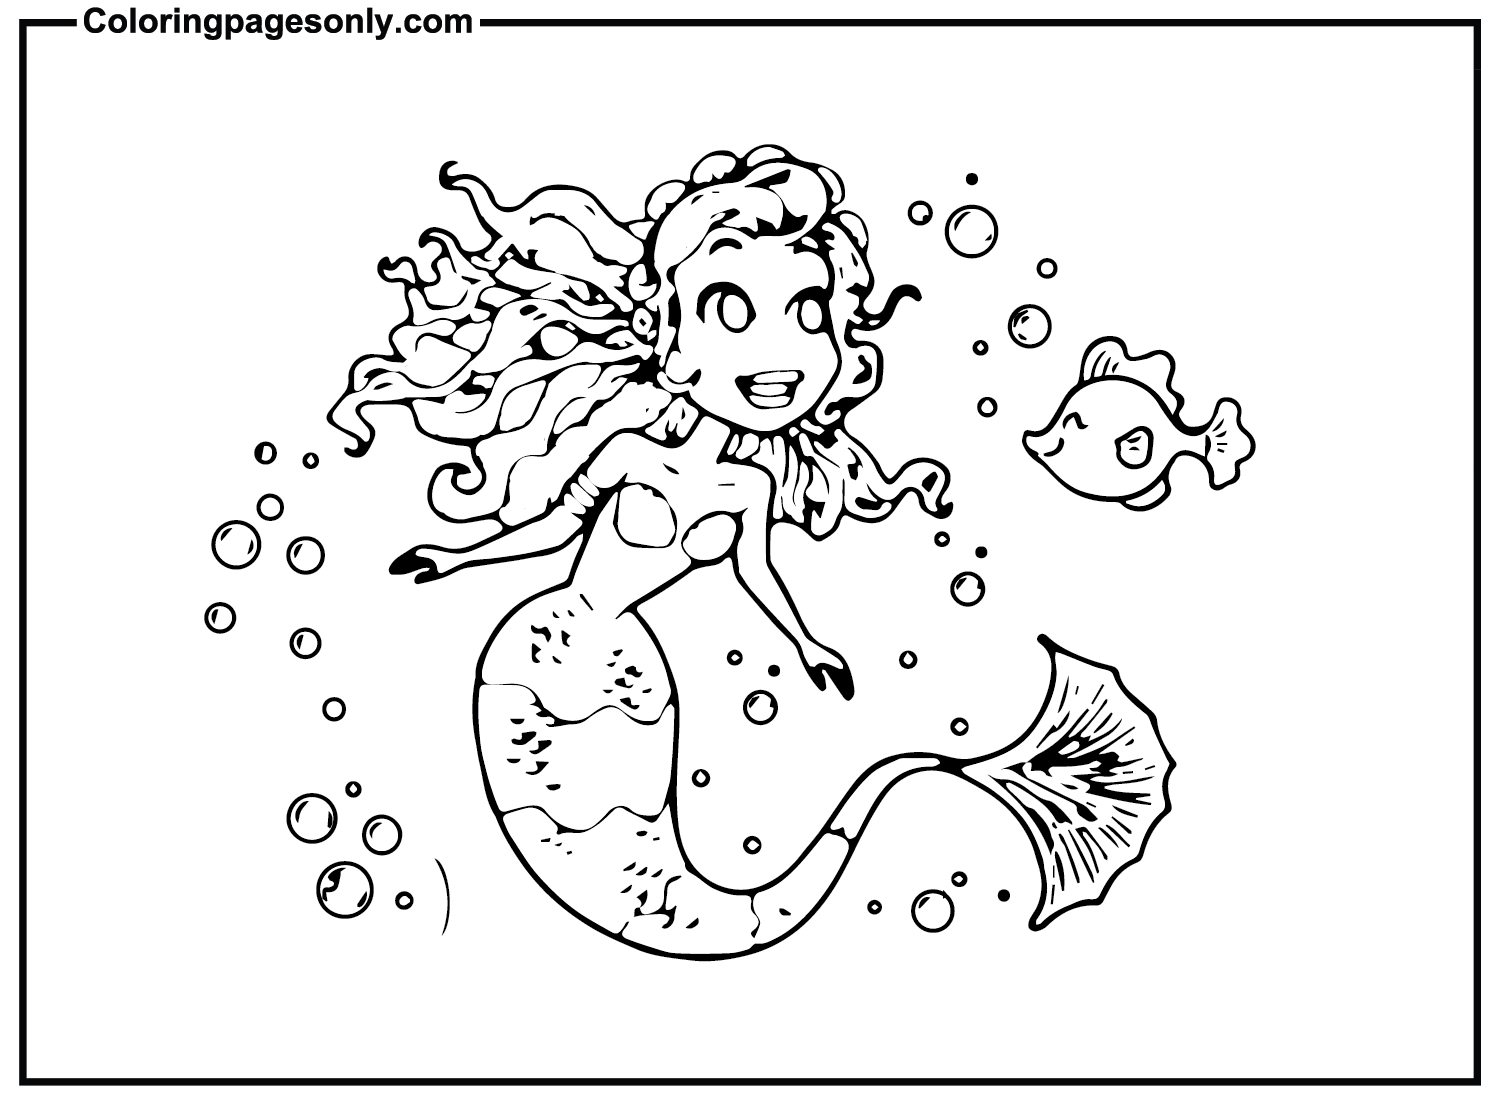 Halle Bailey Movies And Tv Shows Coloring Page Free Printable